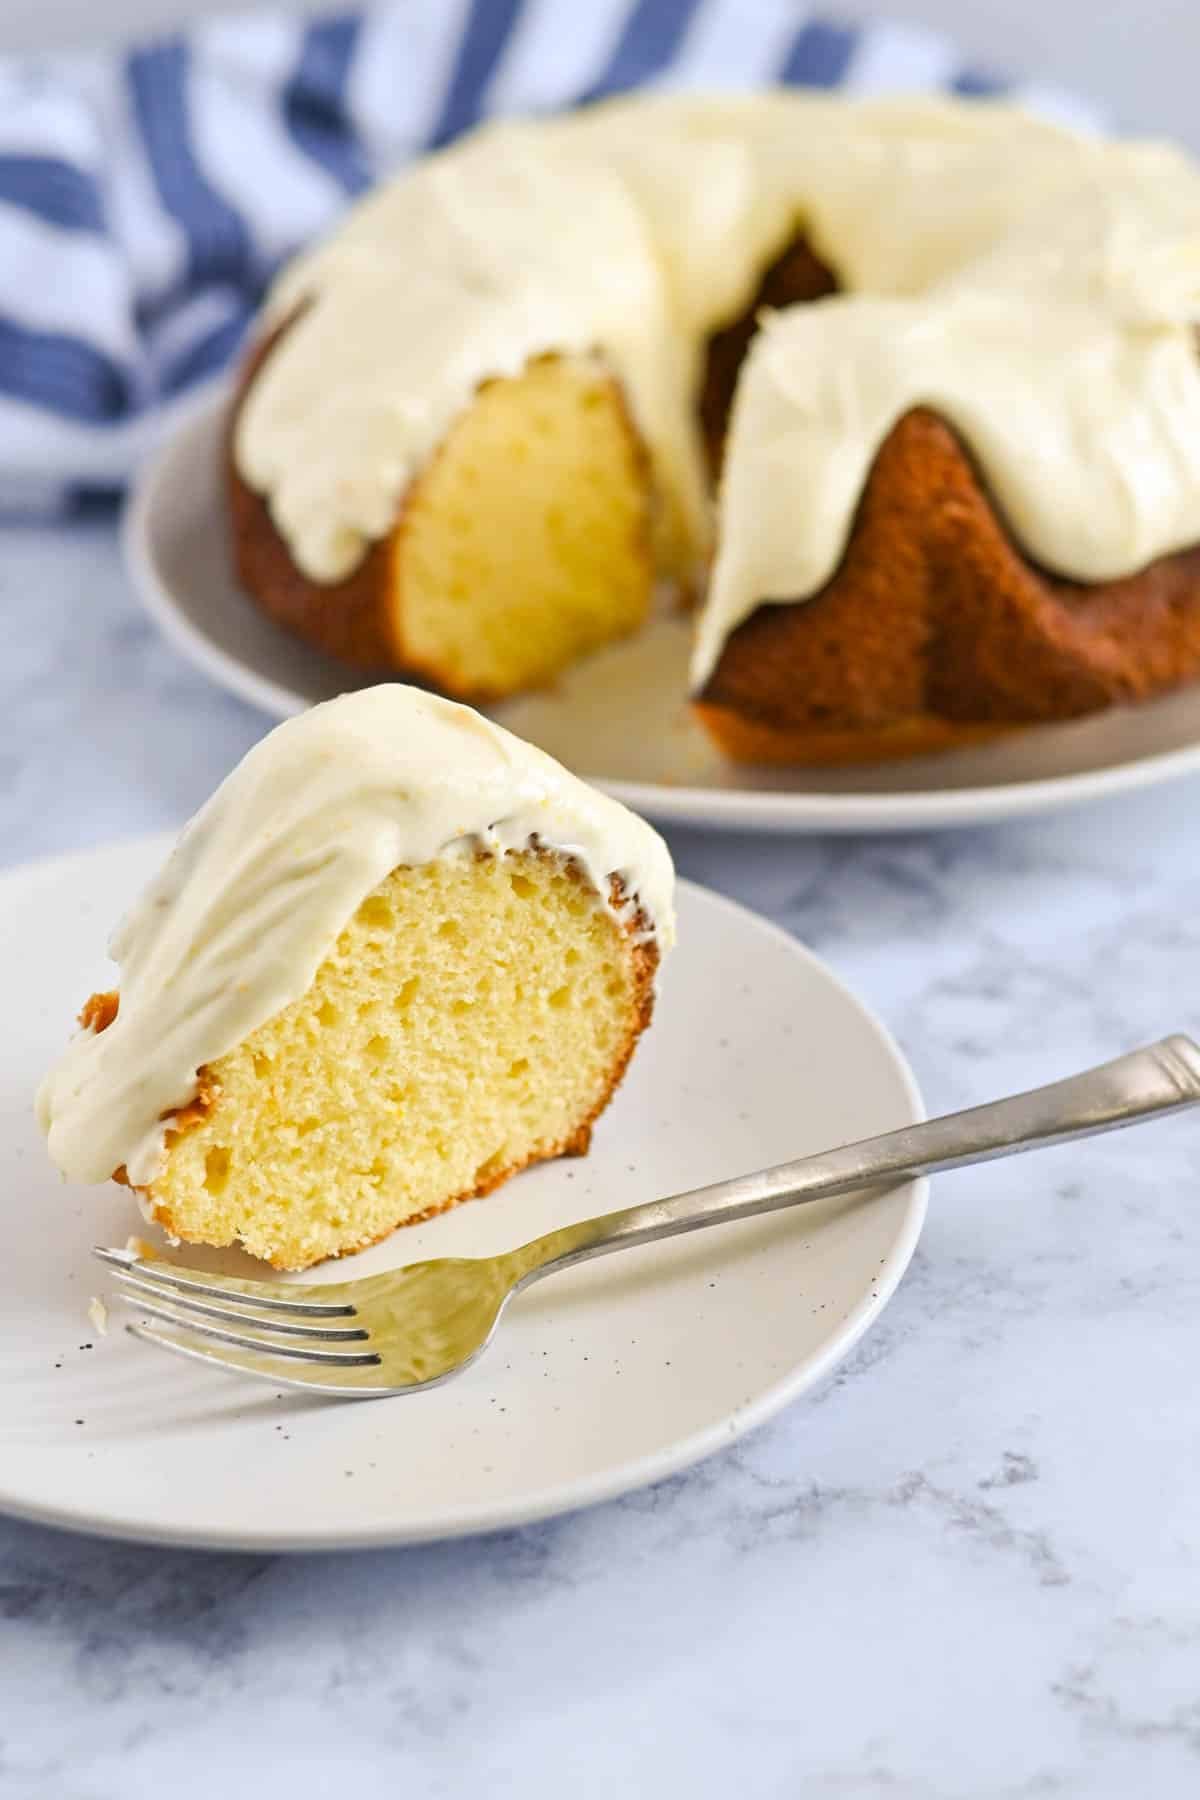 Slice of frosted bundt cake on a plate with a fork; whole bundt cake with a missing slice in the background.